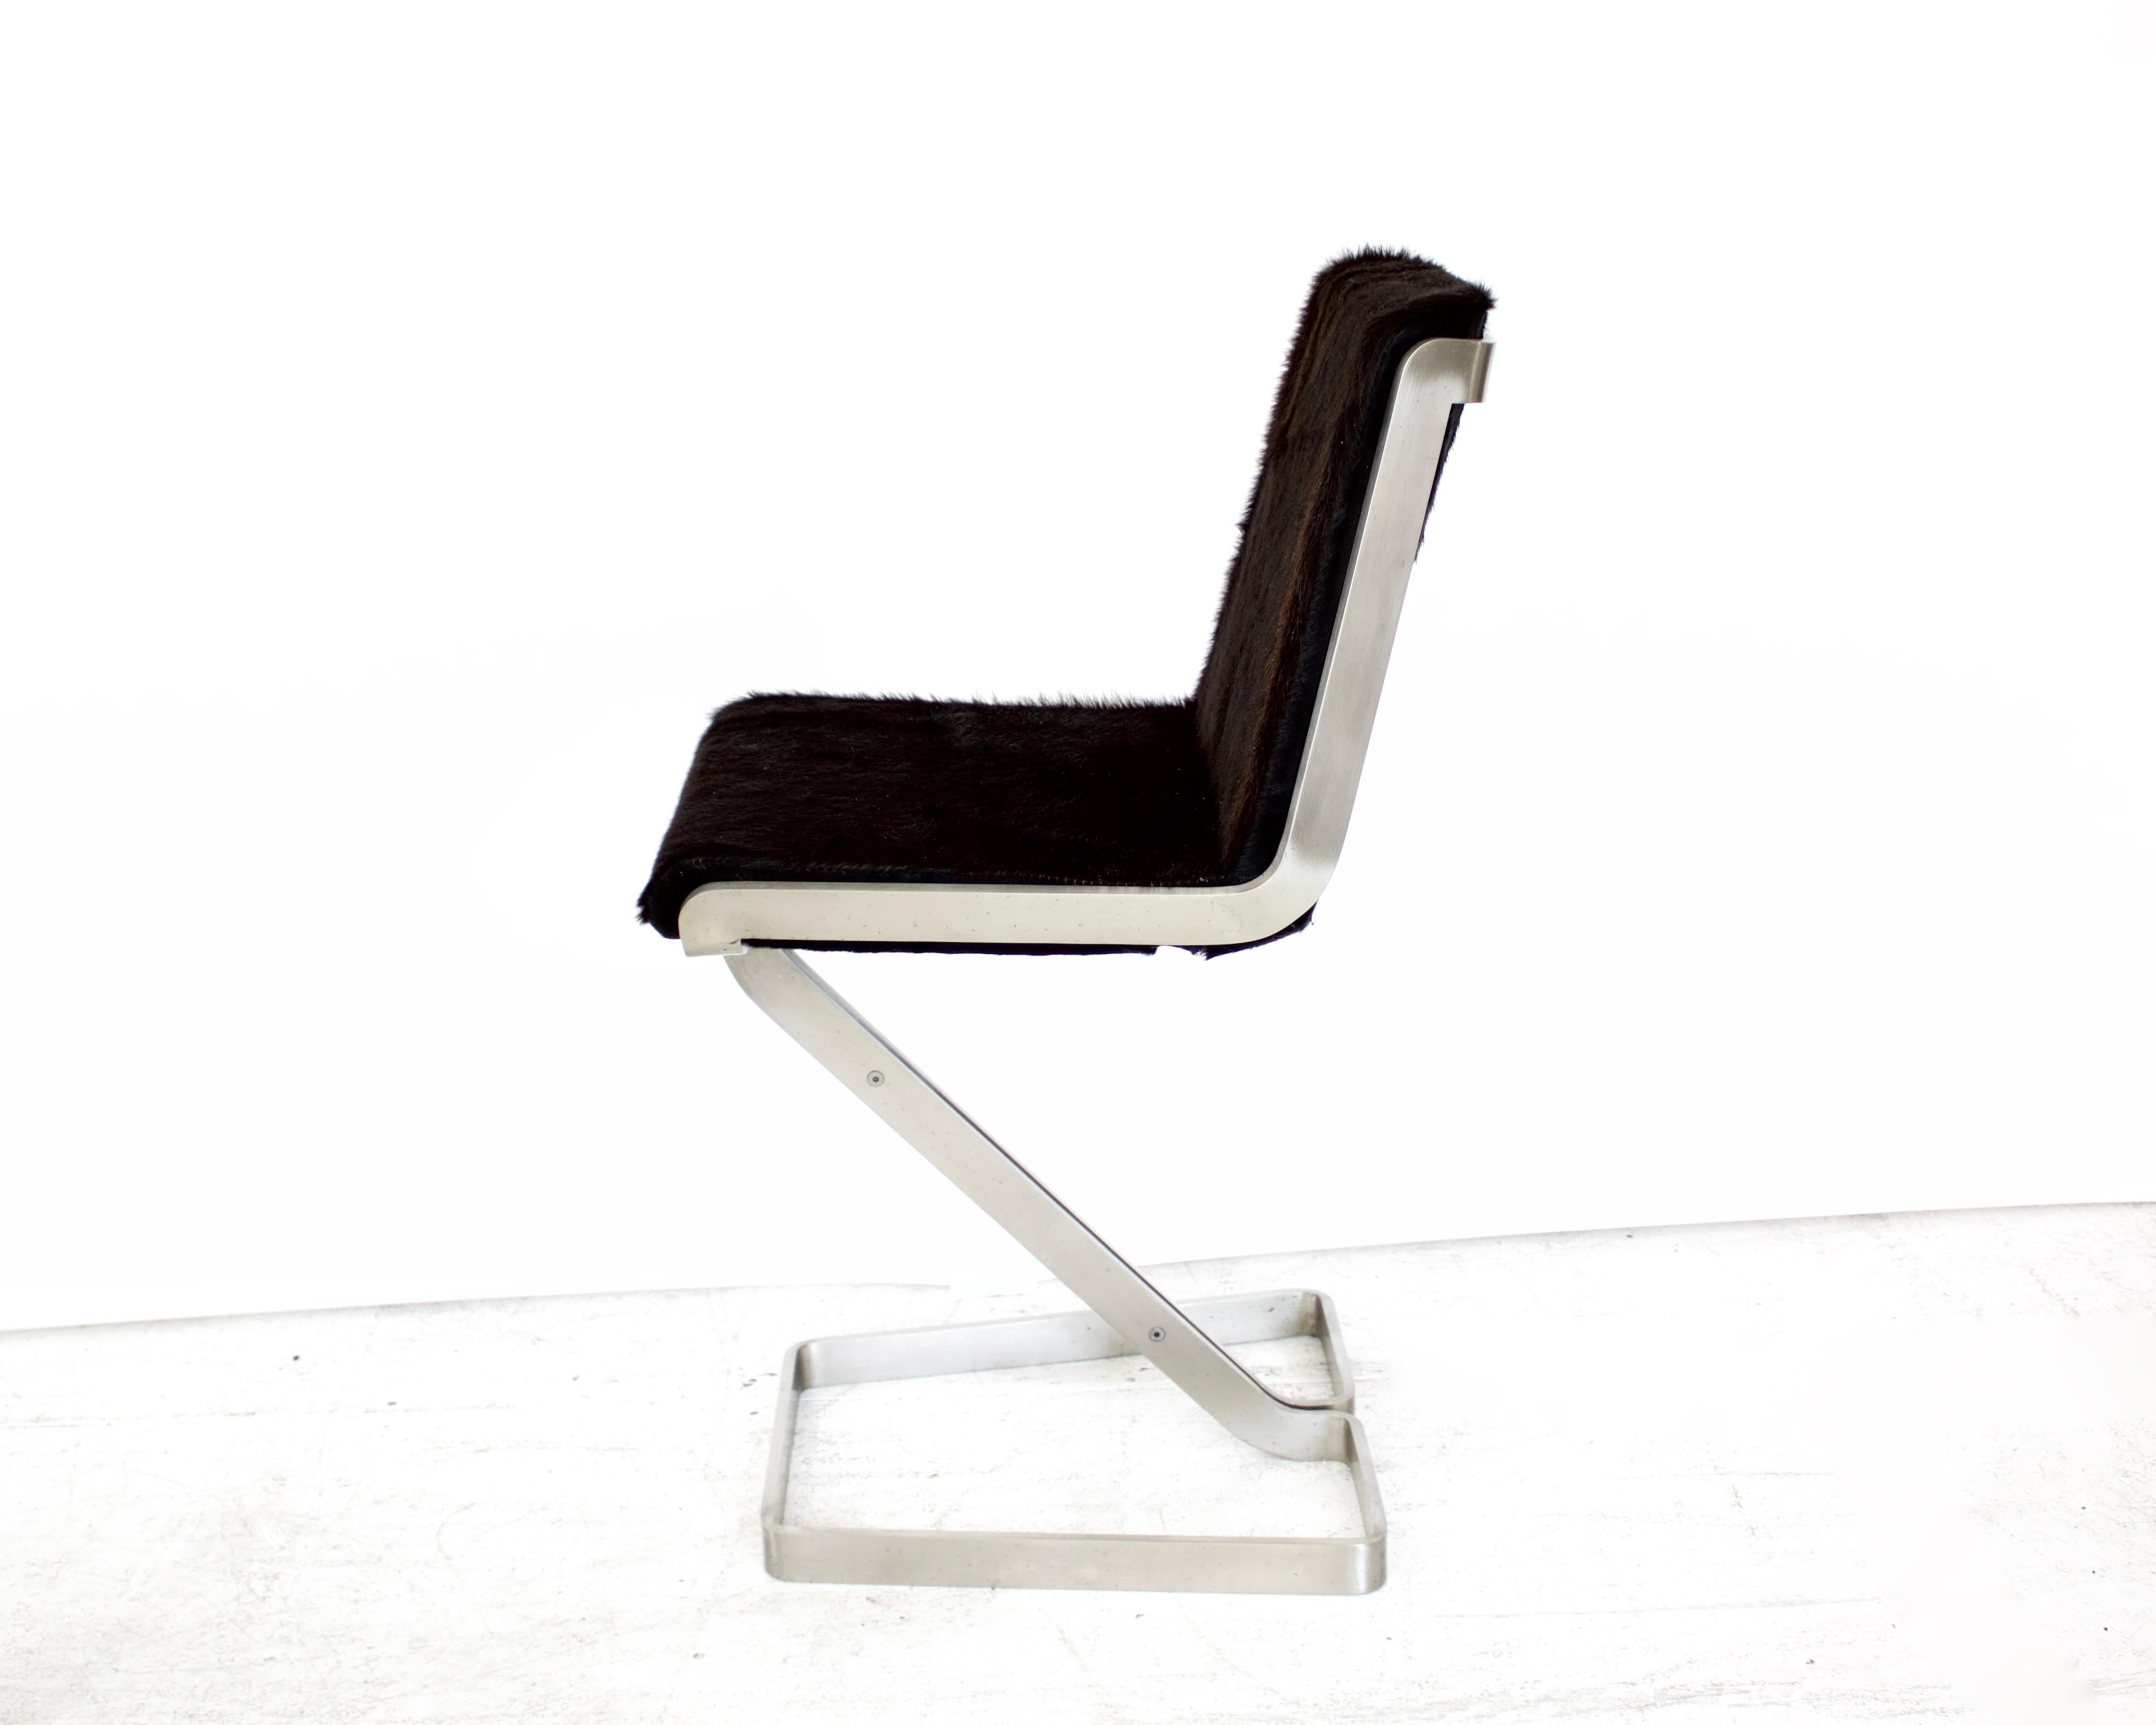 Late 20th Century Italian Stainless Steel Desk Chair by Forma Nova For Sale